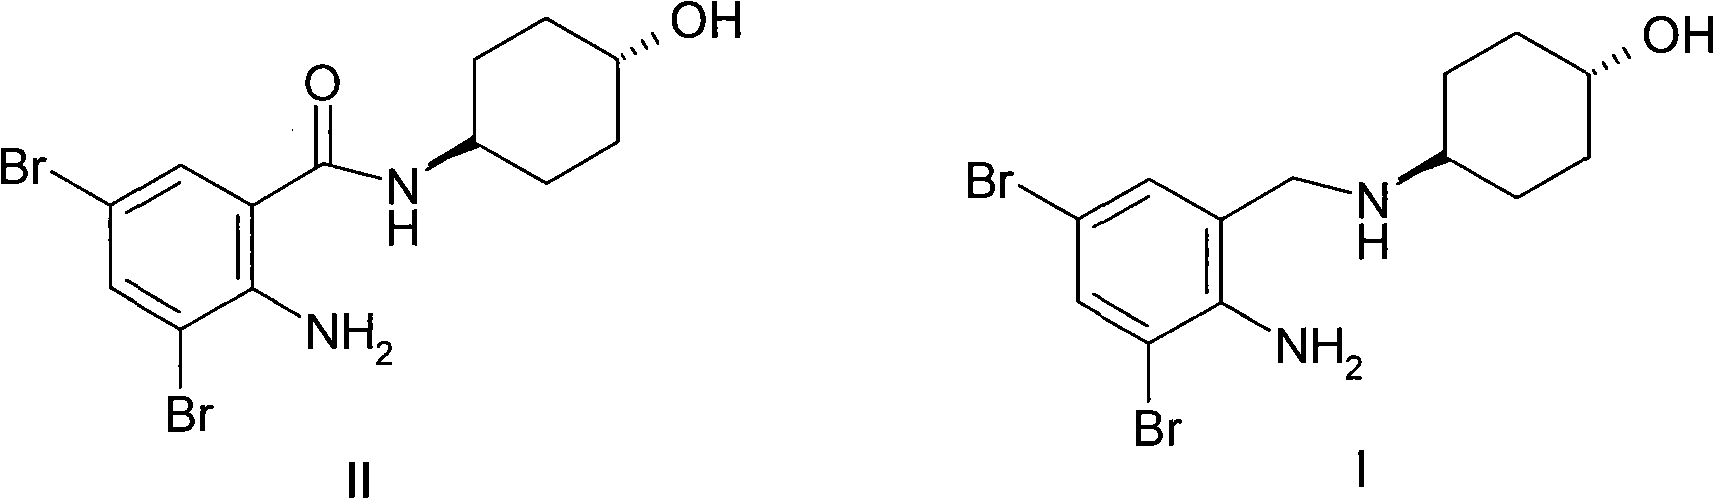 Process for preparing ambroxol, analogue thereof or salts thereof